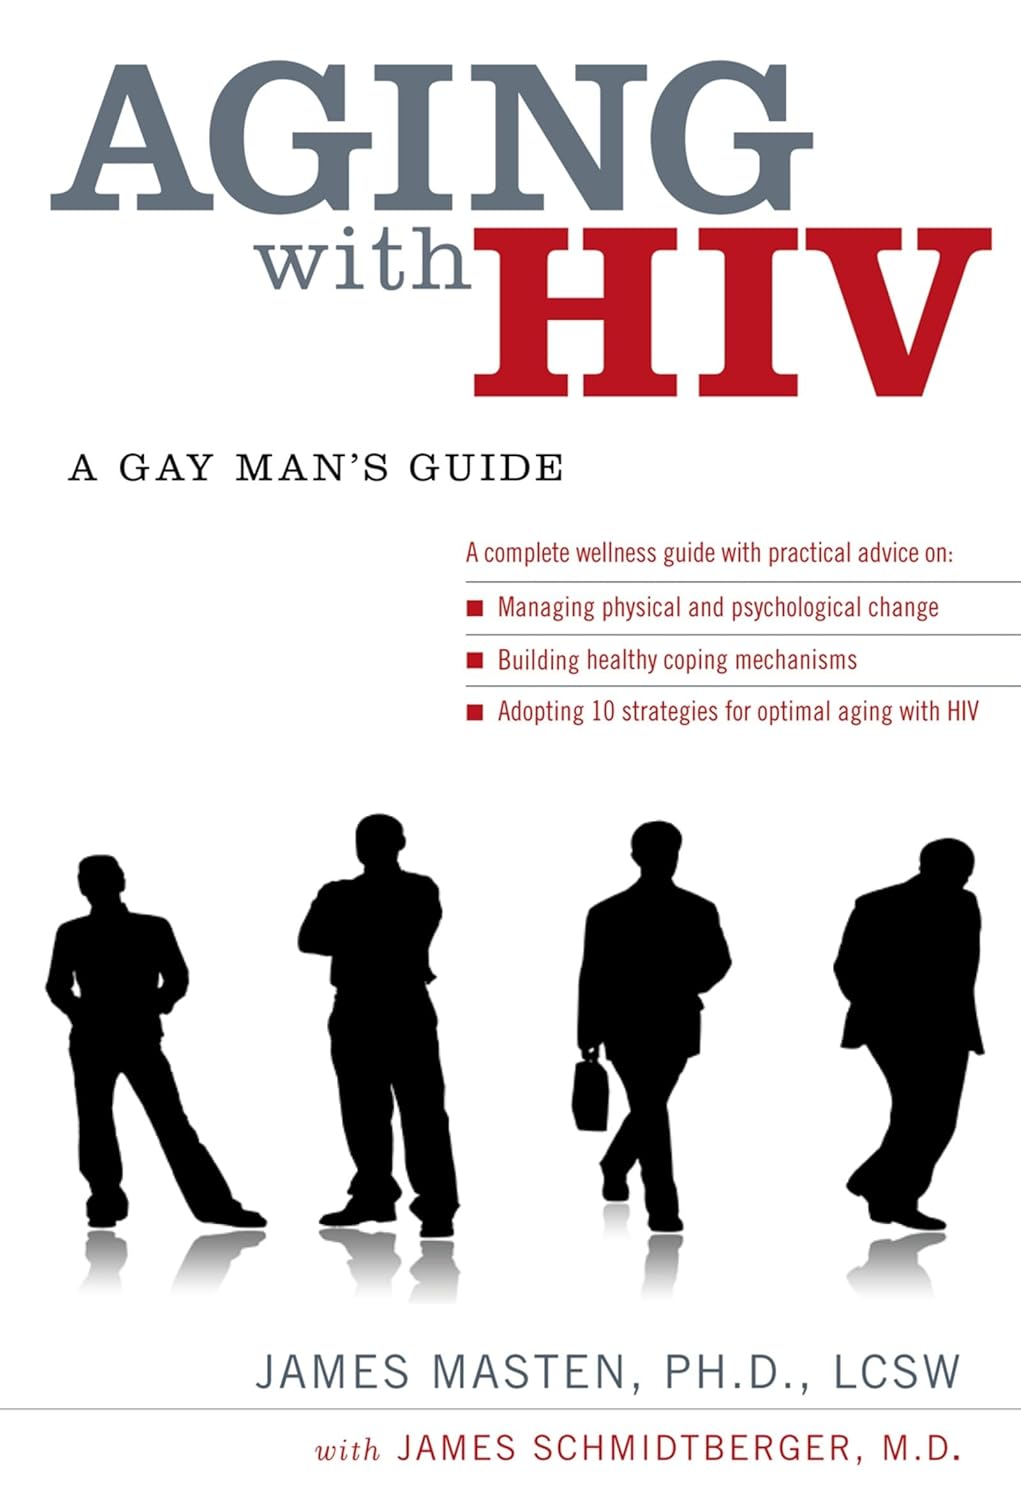 Aging with HIV: A Gay Man's Guide (1ST ed.) - SureShot Books Publishing LLC